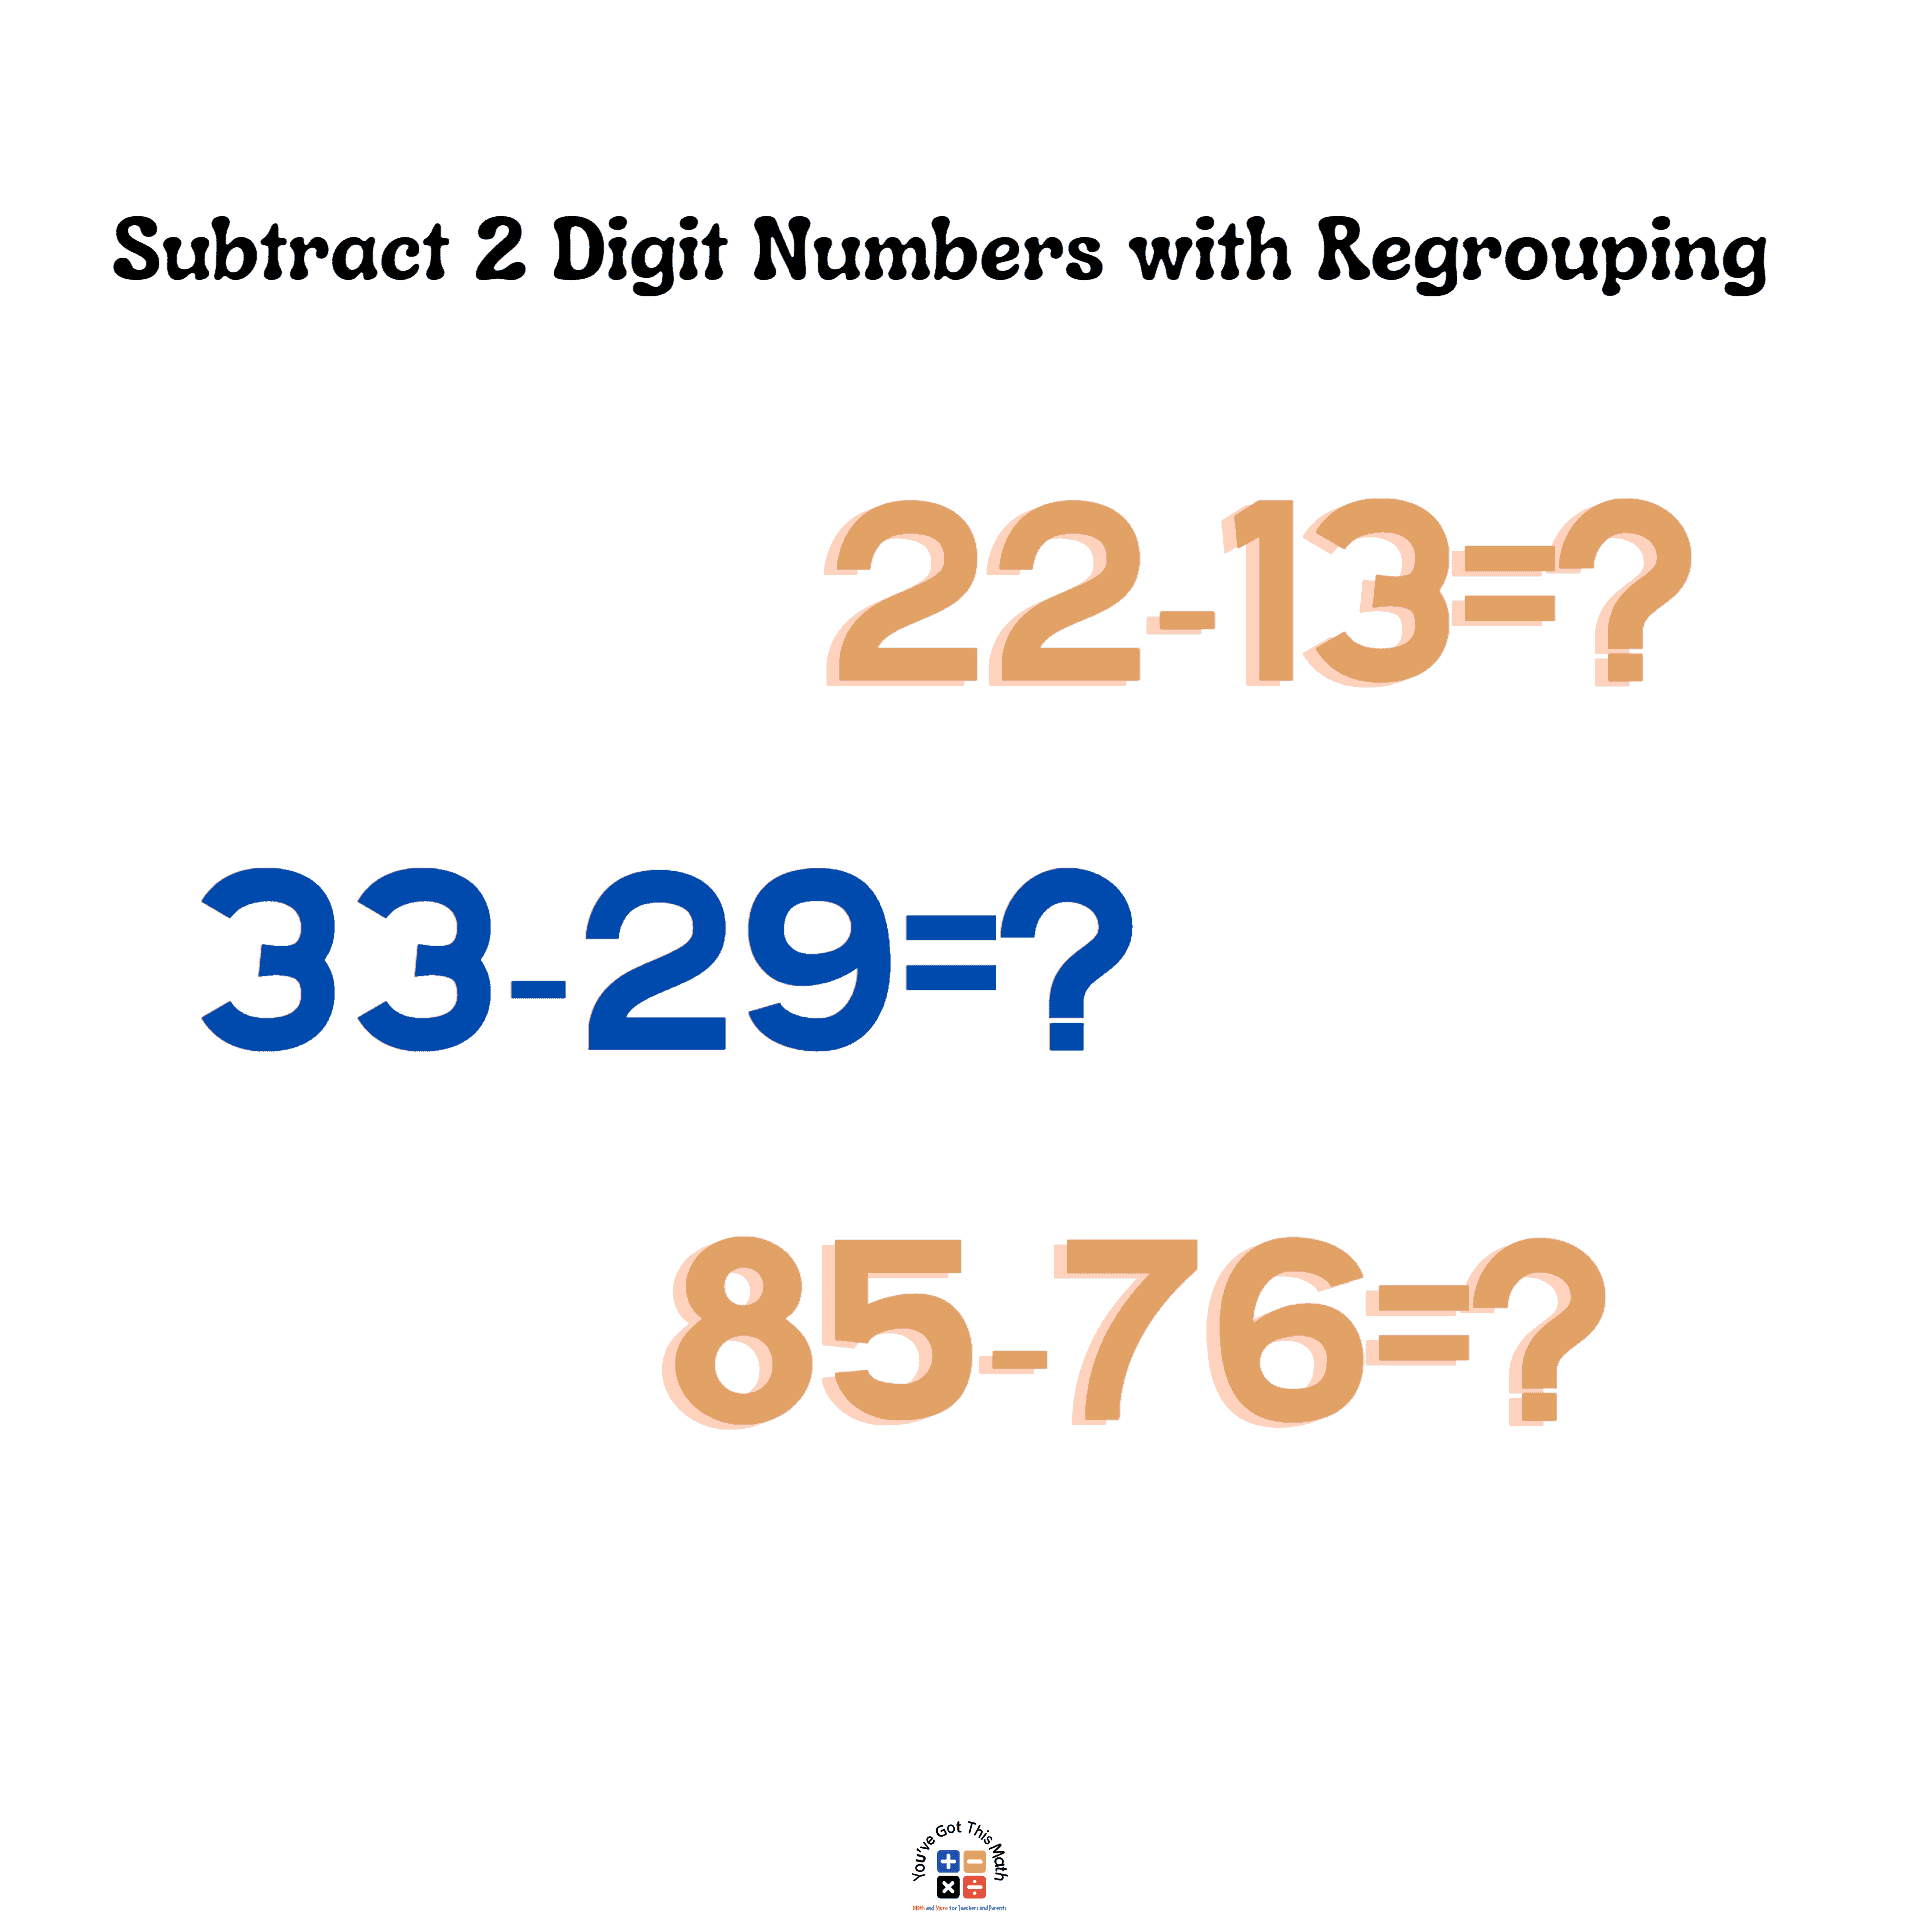 Subtraction of 2 digit numbers with regrouping